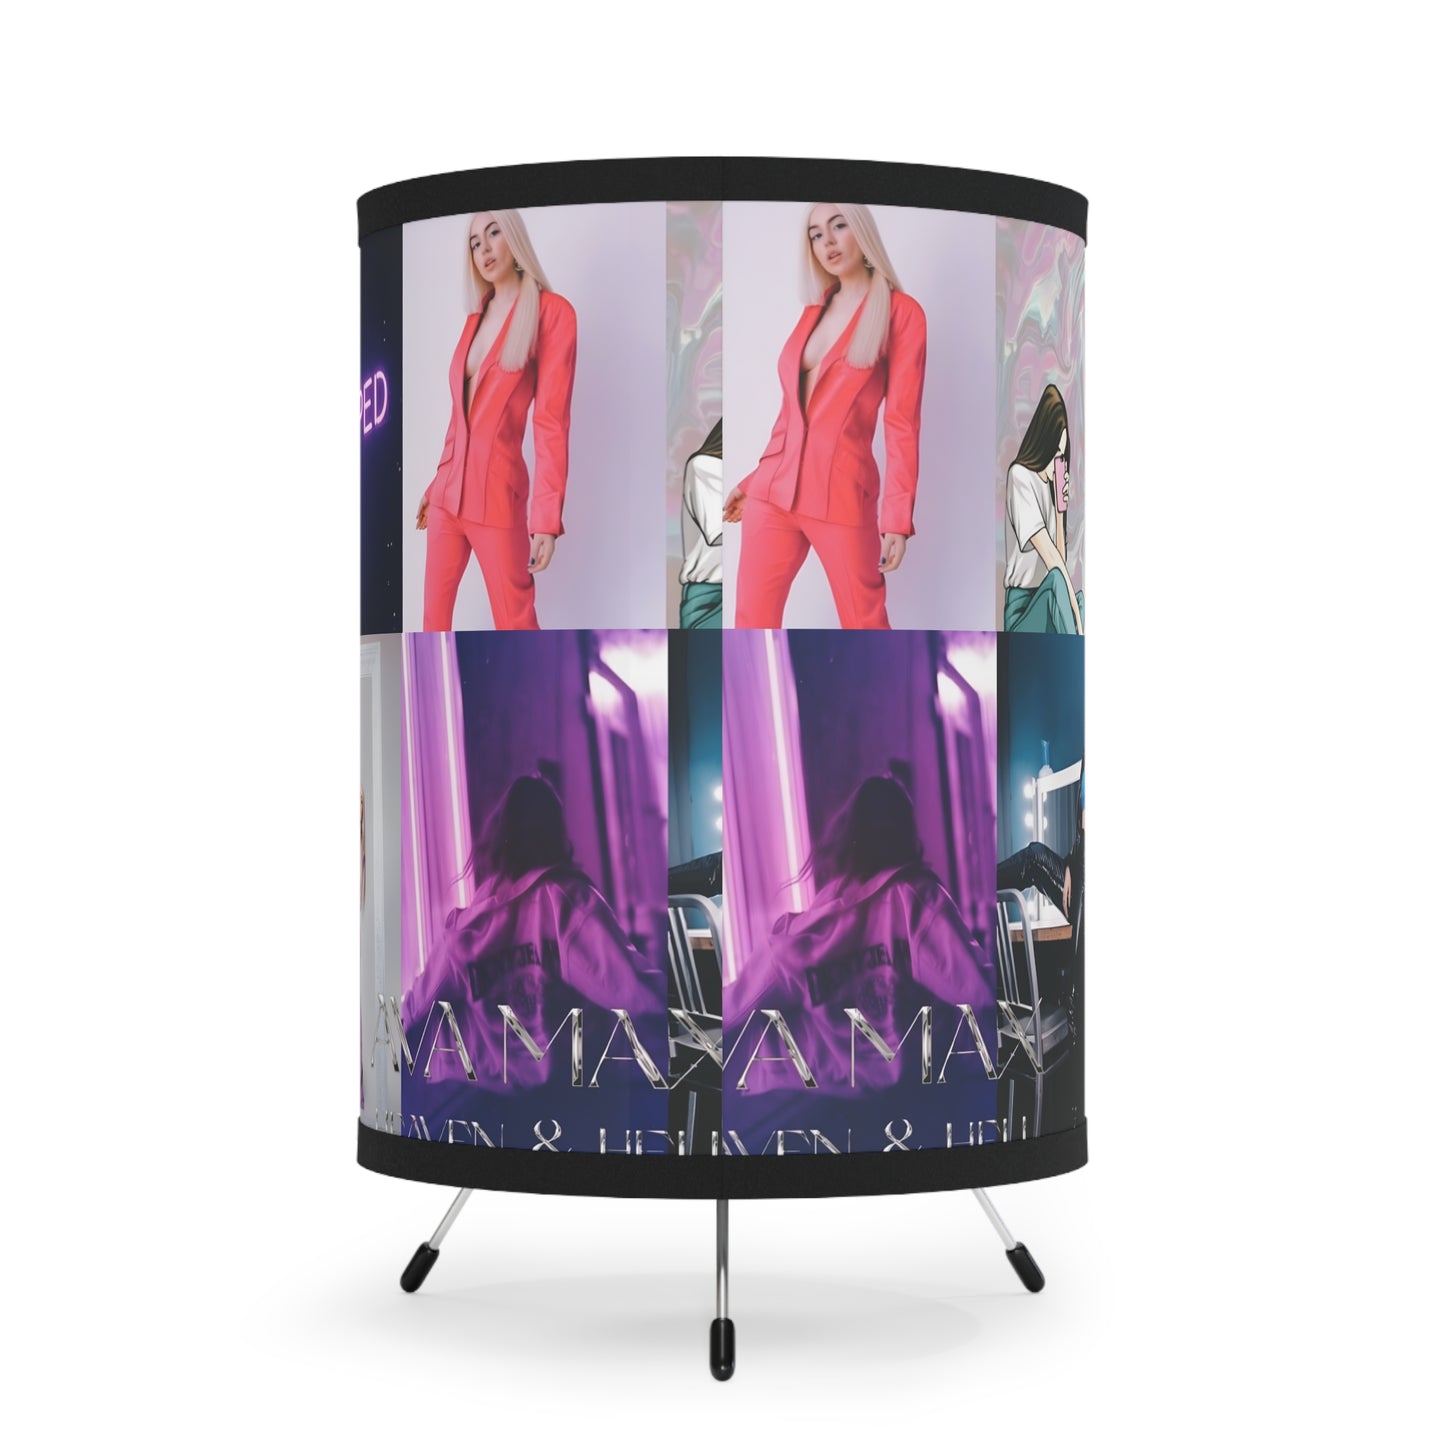 Ava Max Belladonna Photo Collage Tripod Lamp with High-Res Printed Shade